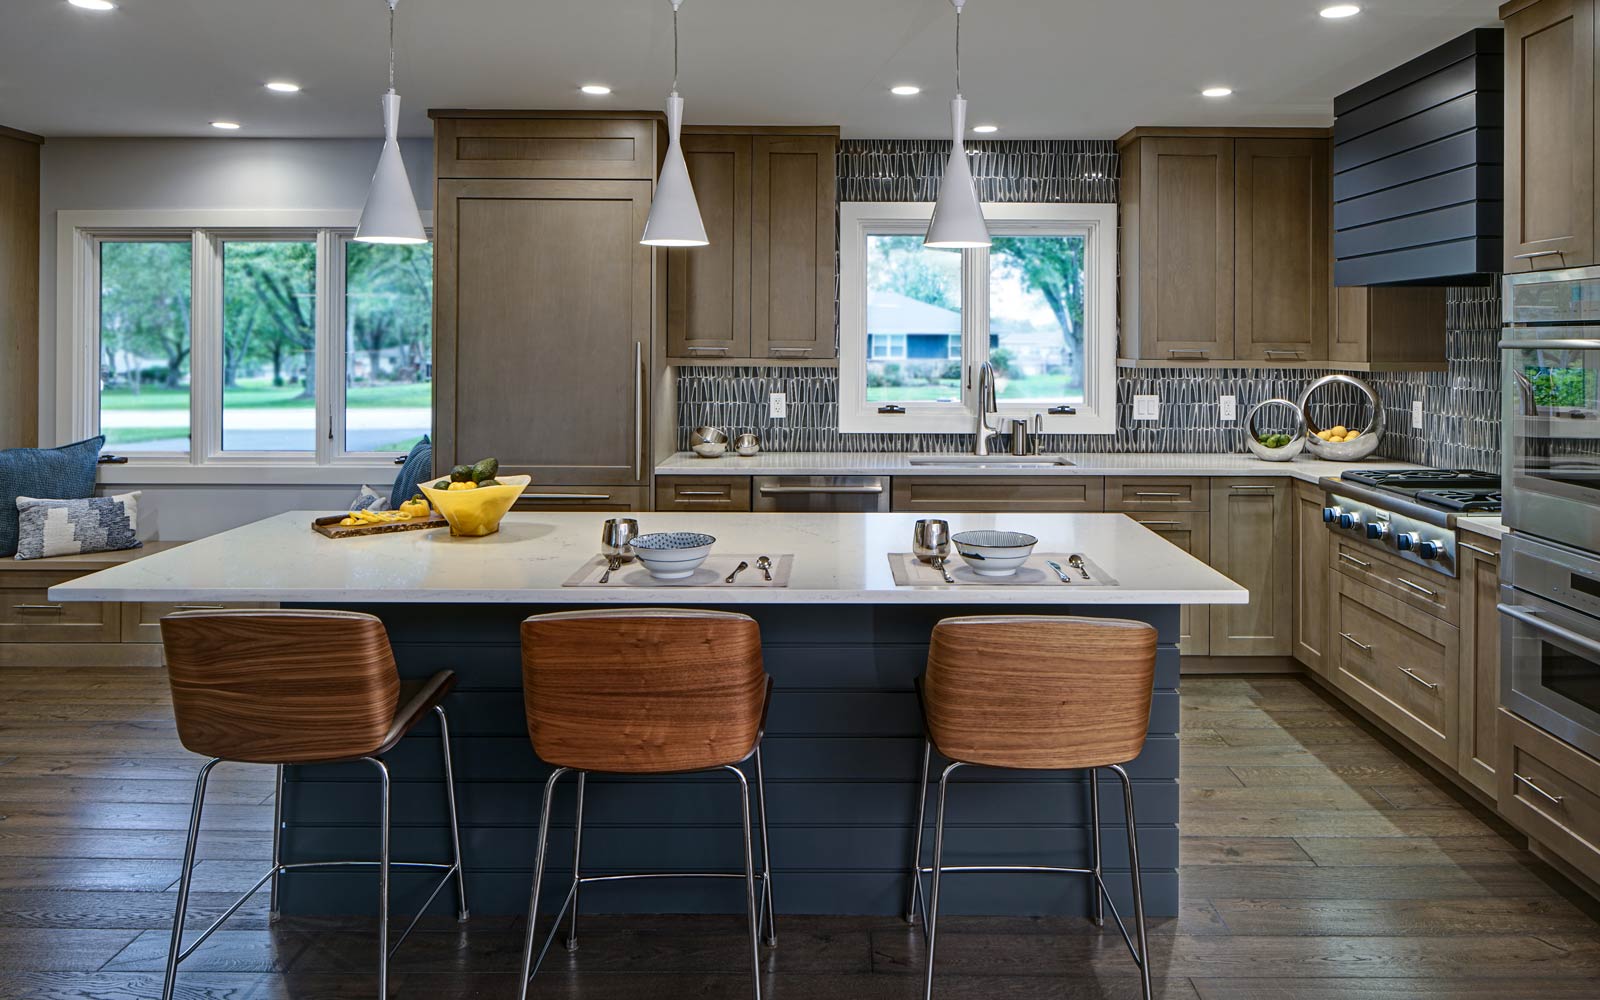 This redesigned kitchen utilizes colorful palette of materials and textures.